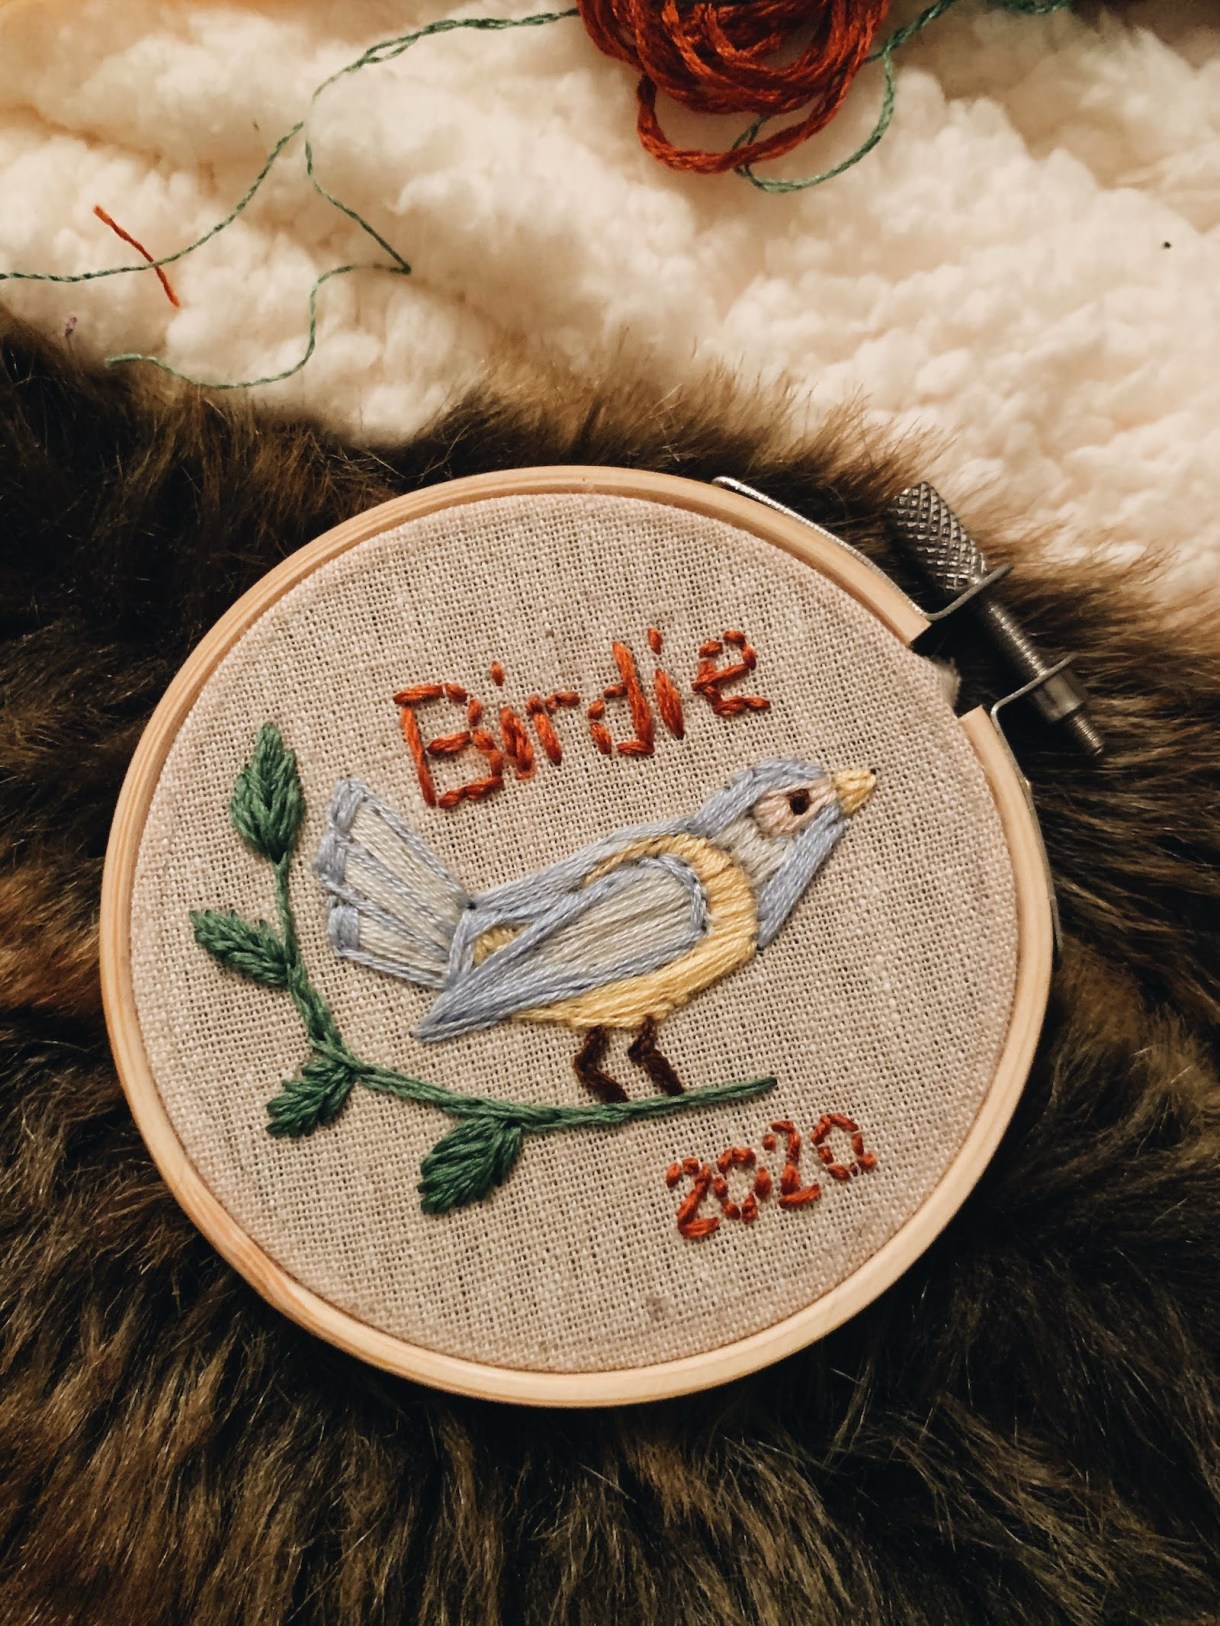 an embroidery ring with a small blue bird stitched on the fabric, the word Birdie in orange thread above the bird and the date 2020 stitched below